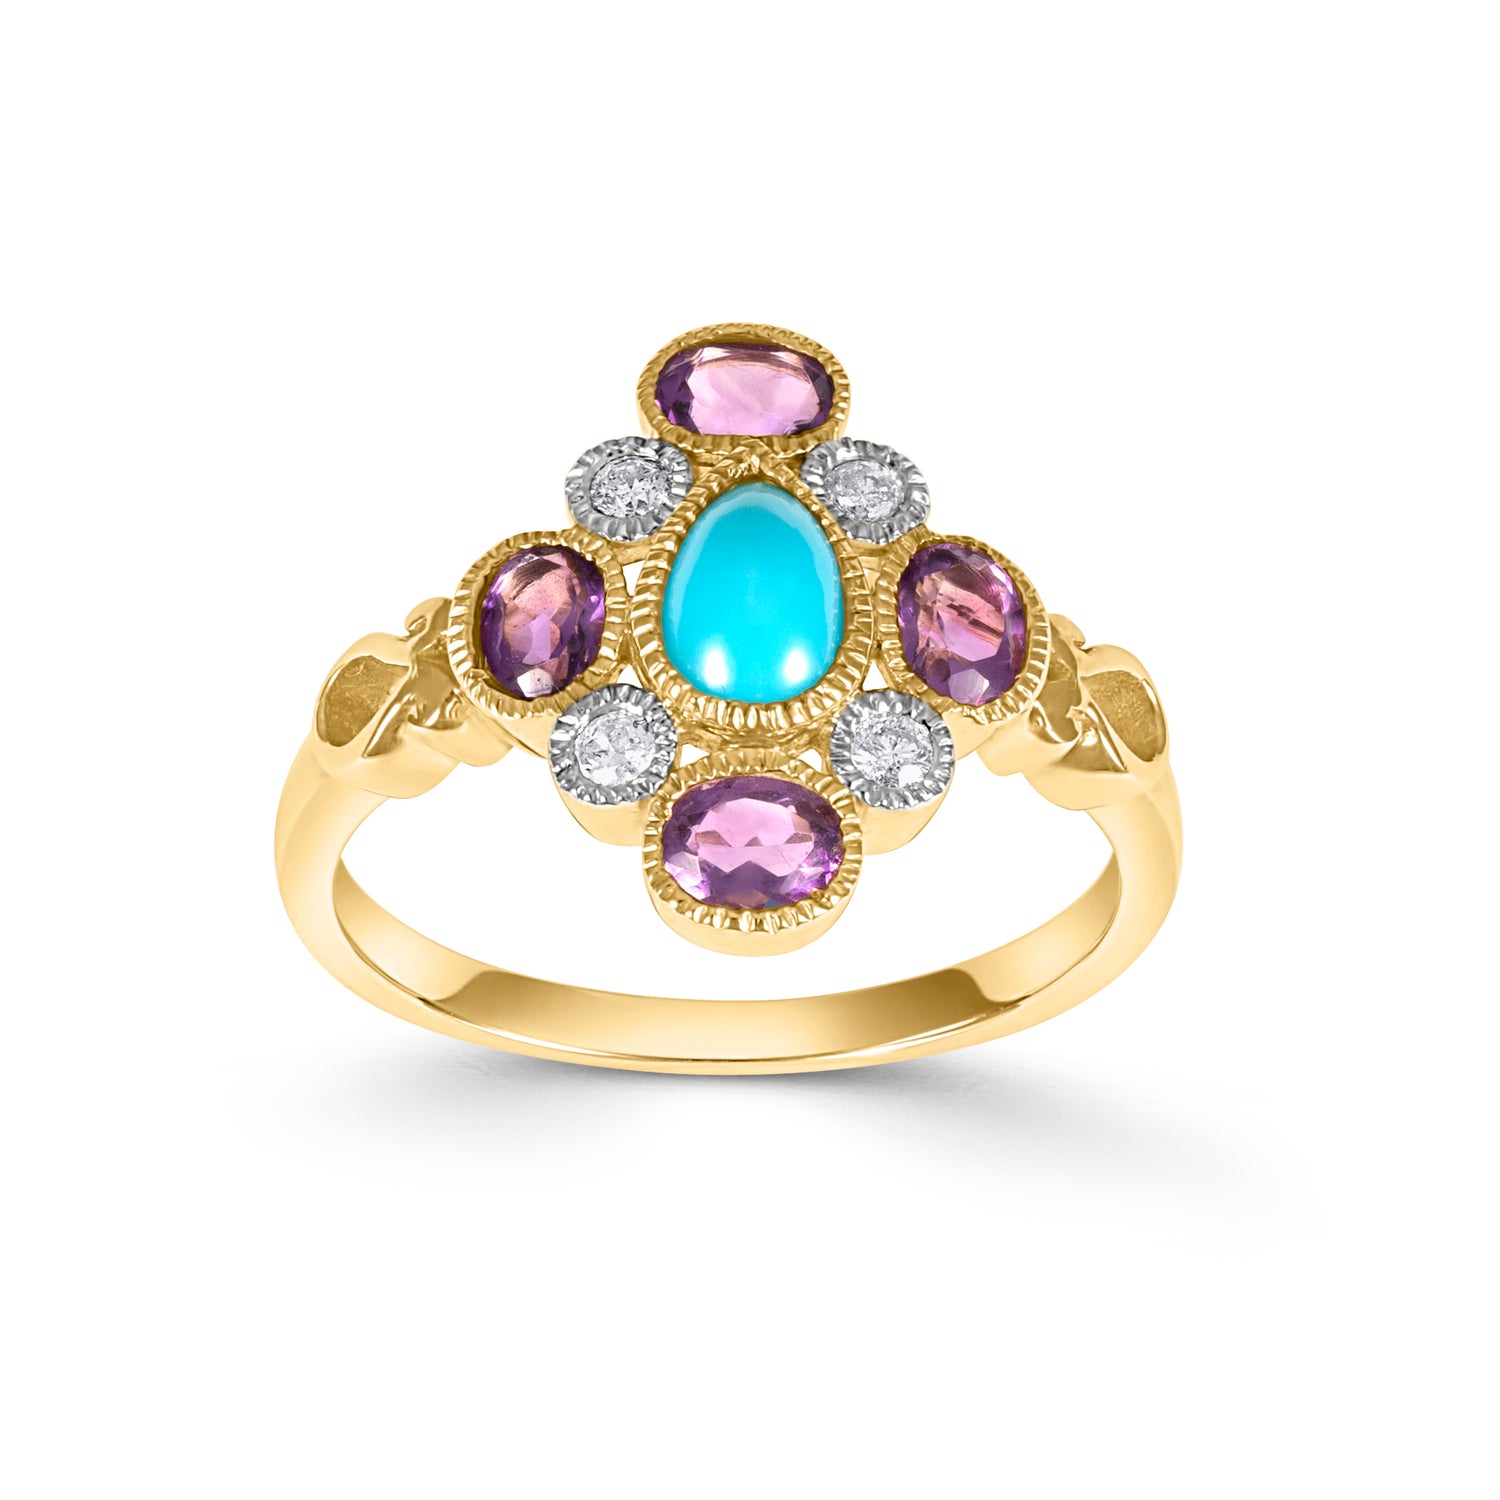 9ct Gold Turquoise, Amethyst and Diamond Ring